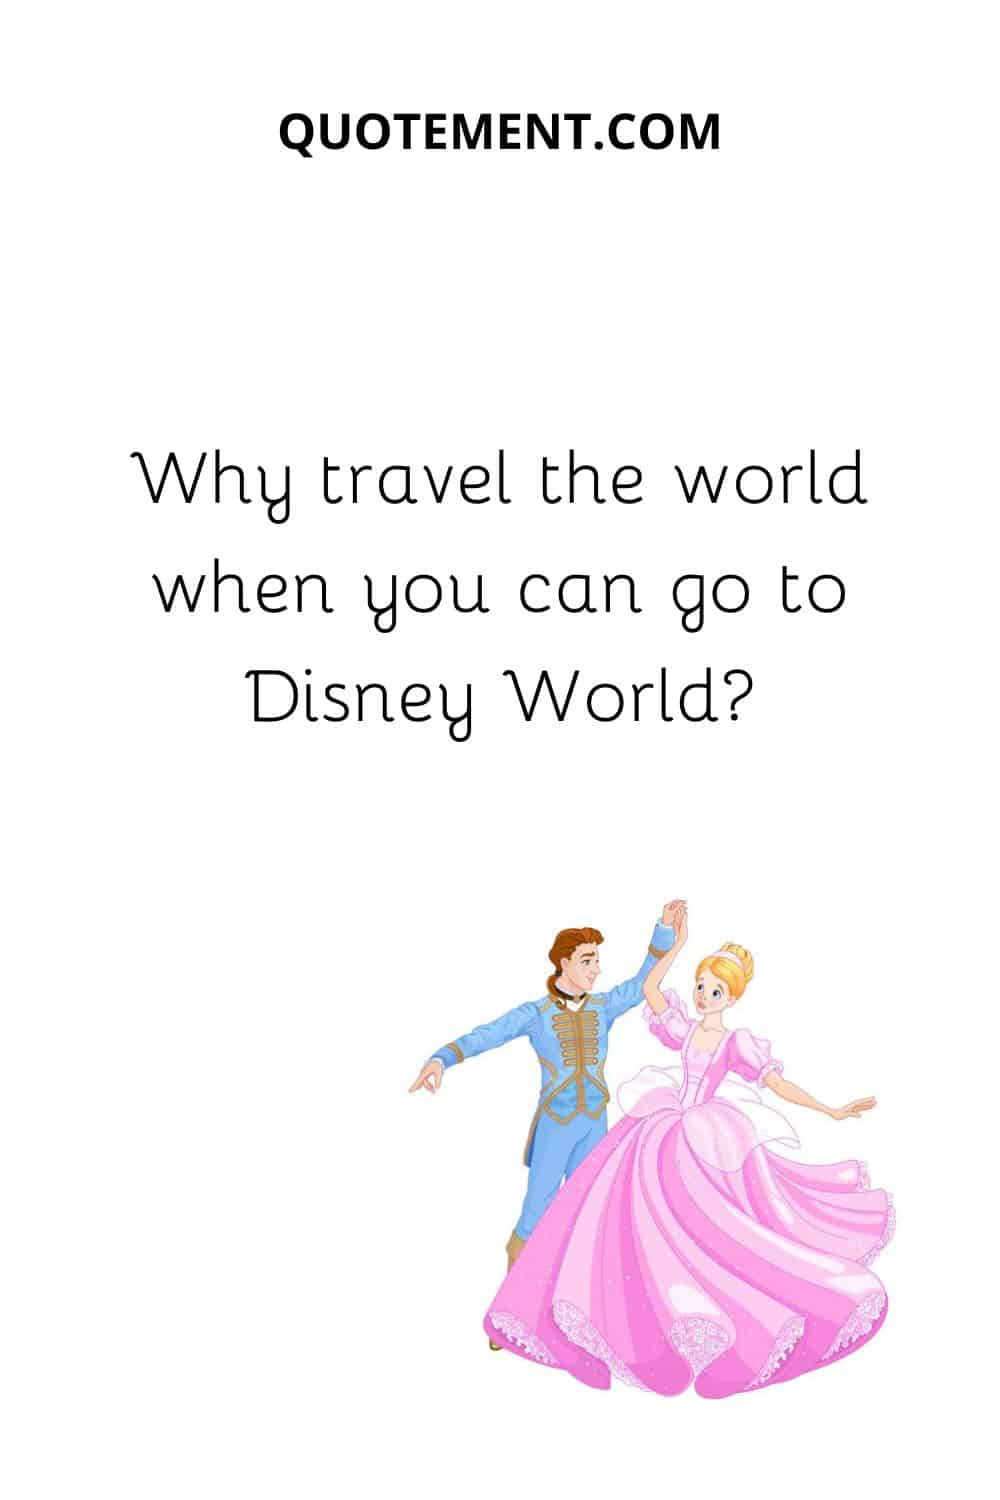 Why travel the world when you can go to Disney World?